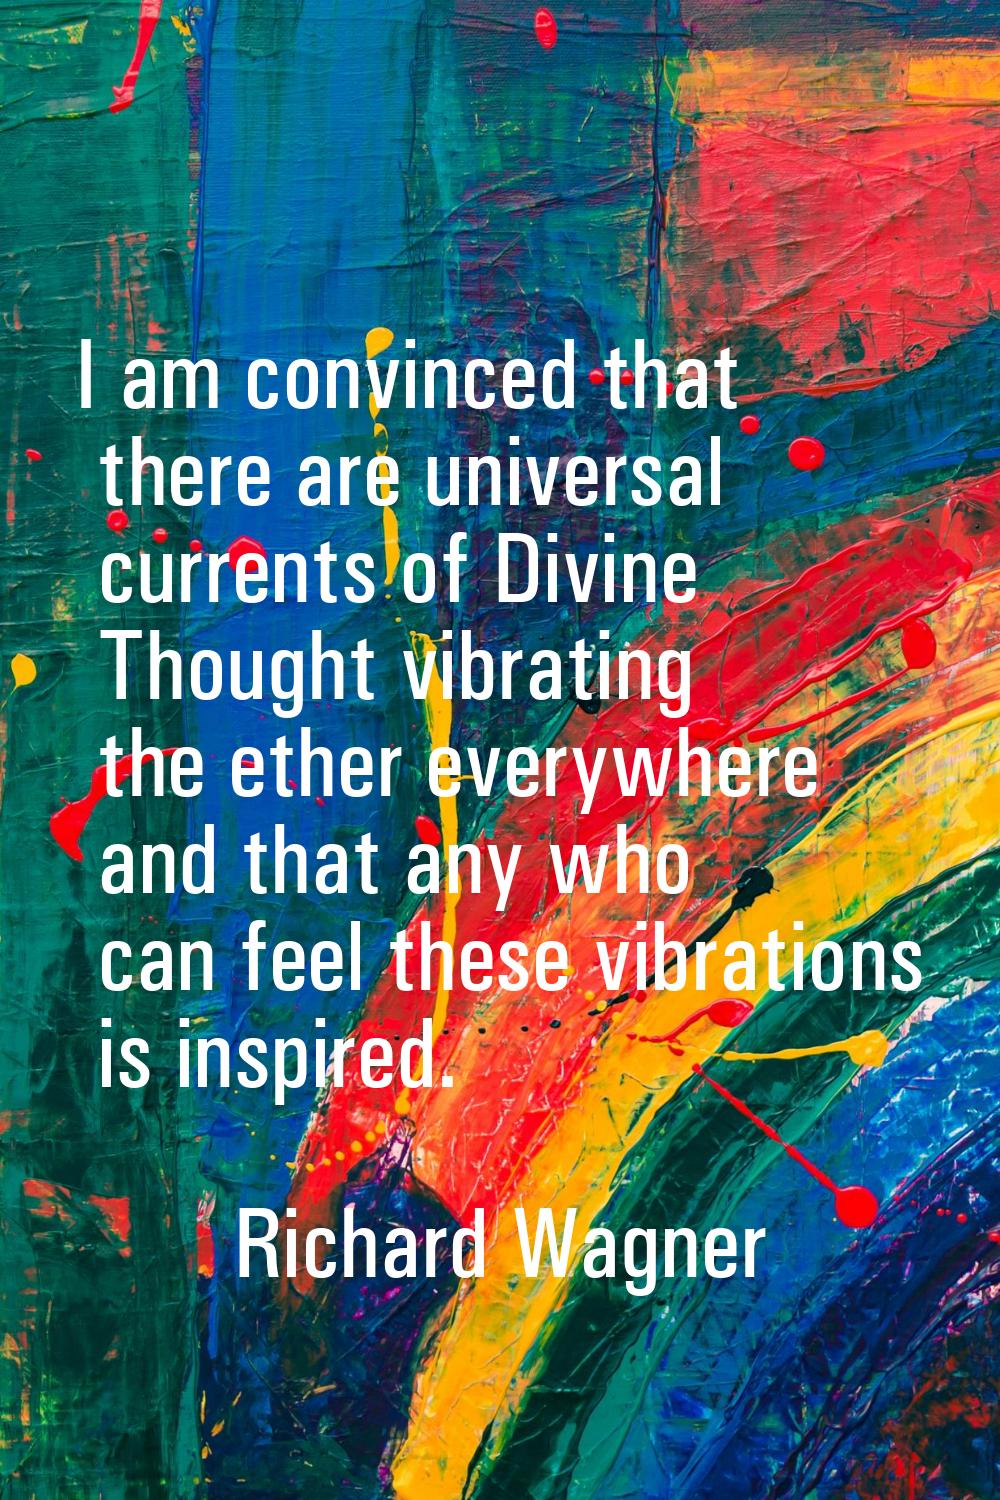 I am convinced that there are universal currents of Divine Thought vibrating the ether everywhere a